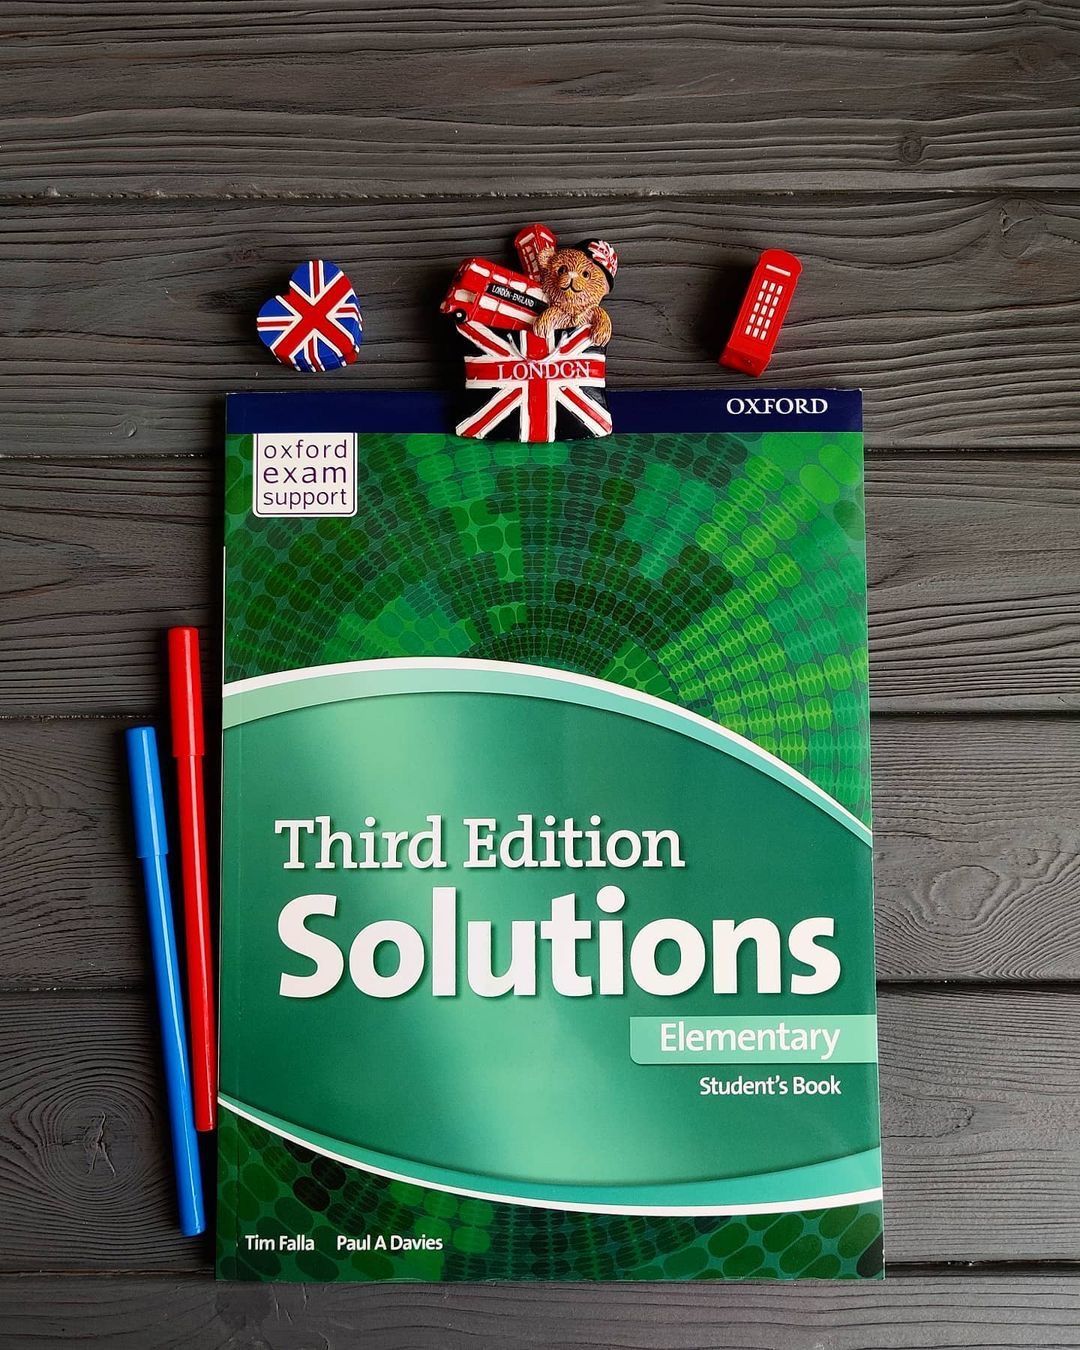 Oxford support. Solutions учебник. Solution Elementary students book 3 Edition.